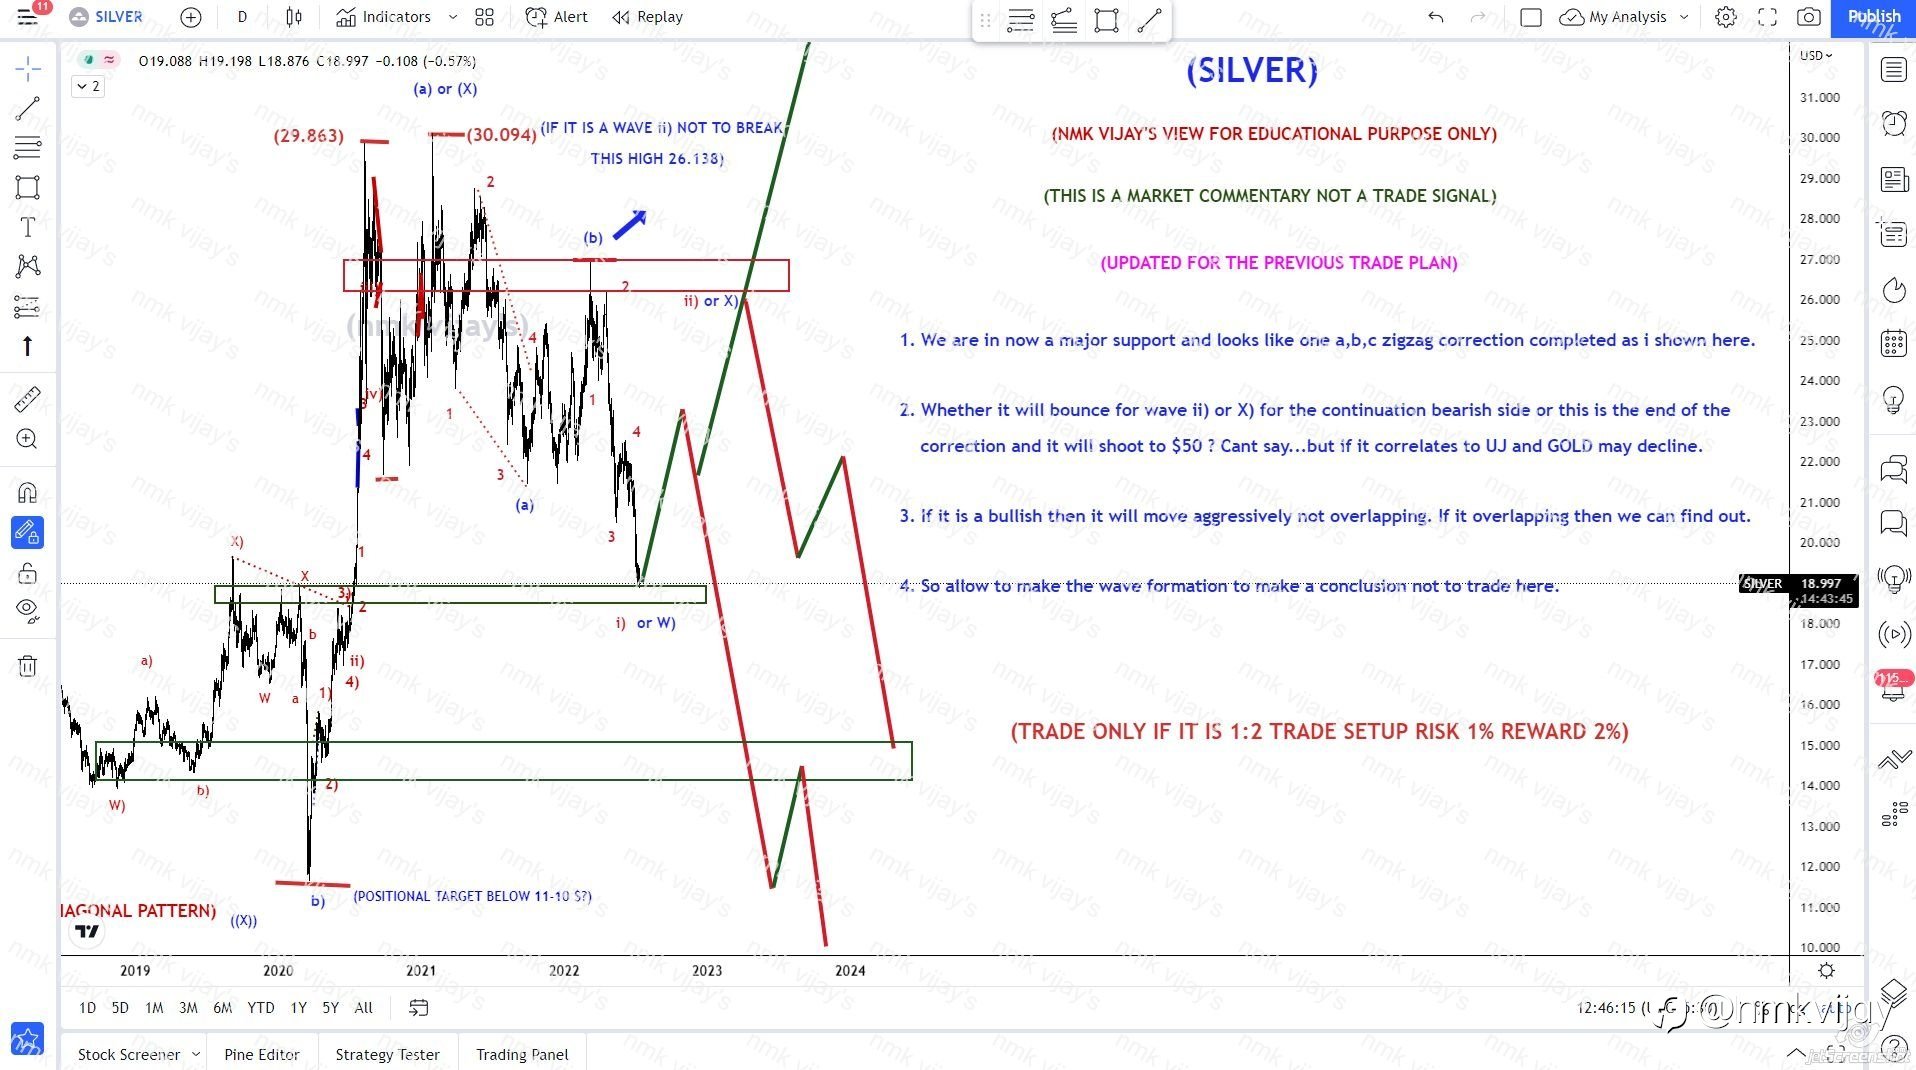 SILVER-Will it retest again 26$ ? for wave ii) or X)